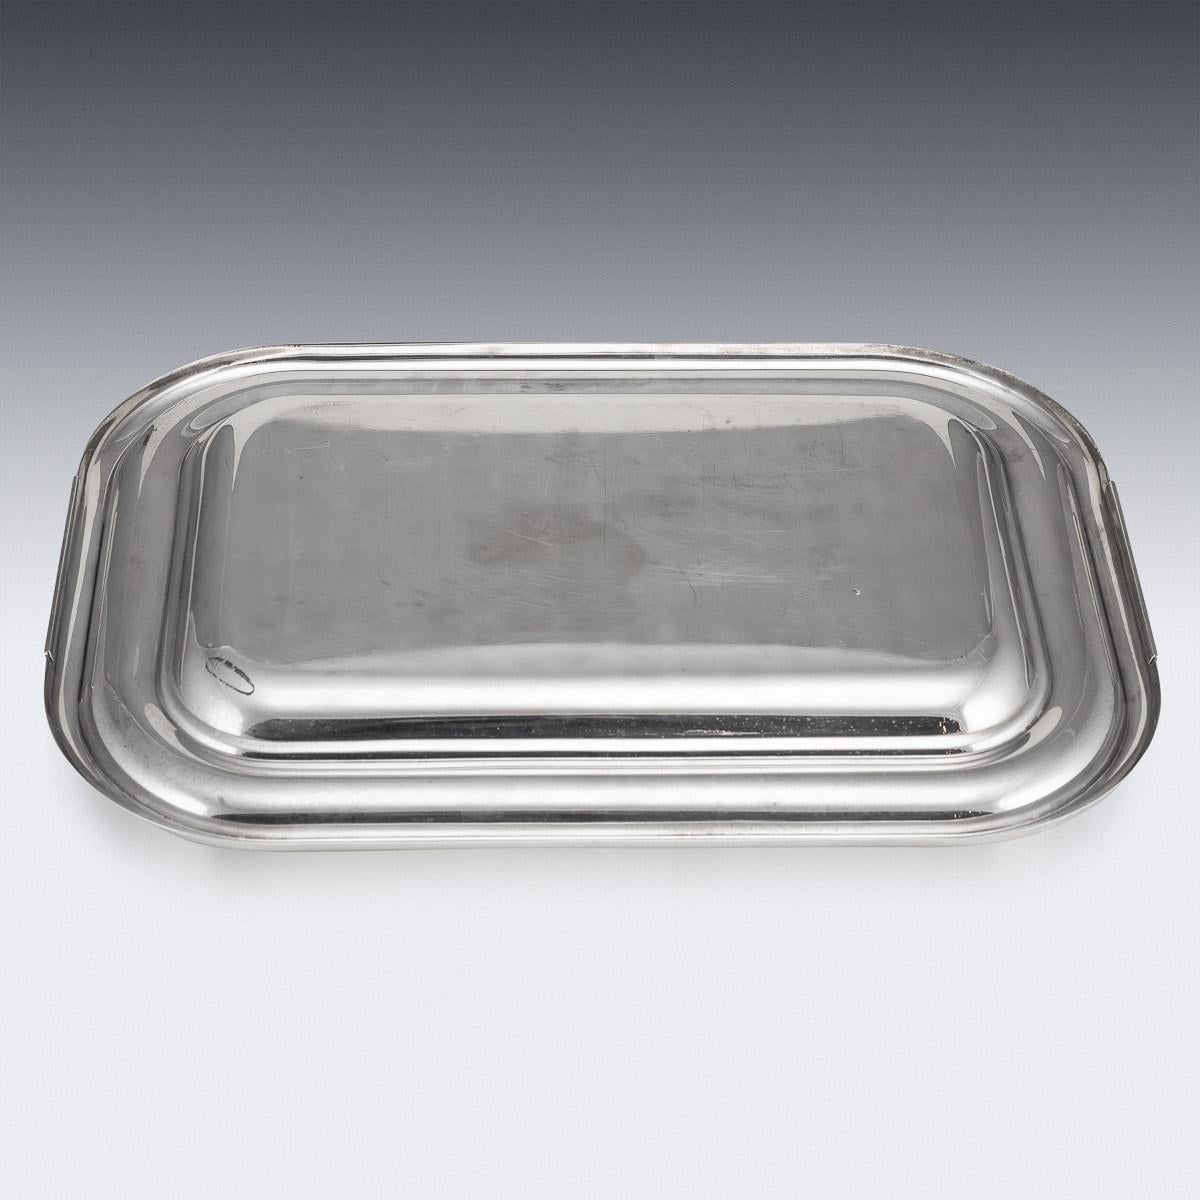 20th Century Italian Silver Plated Crab Serving Dish, c.1960 For Sale 1